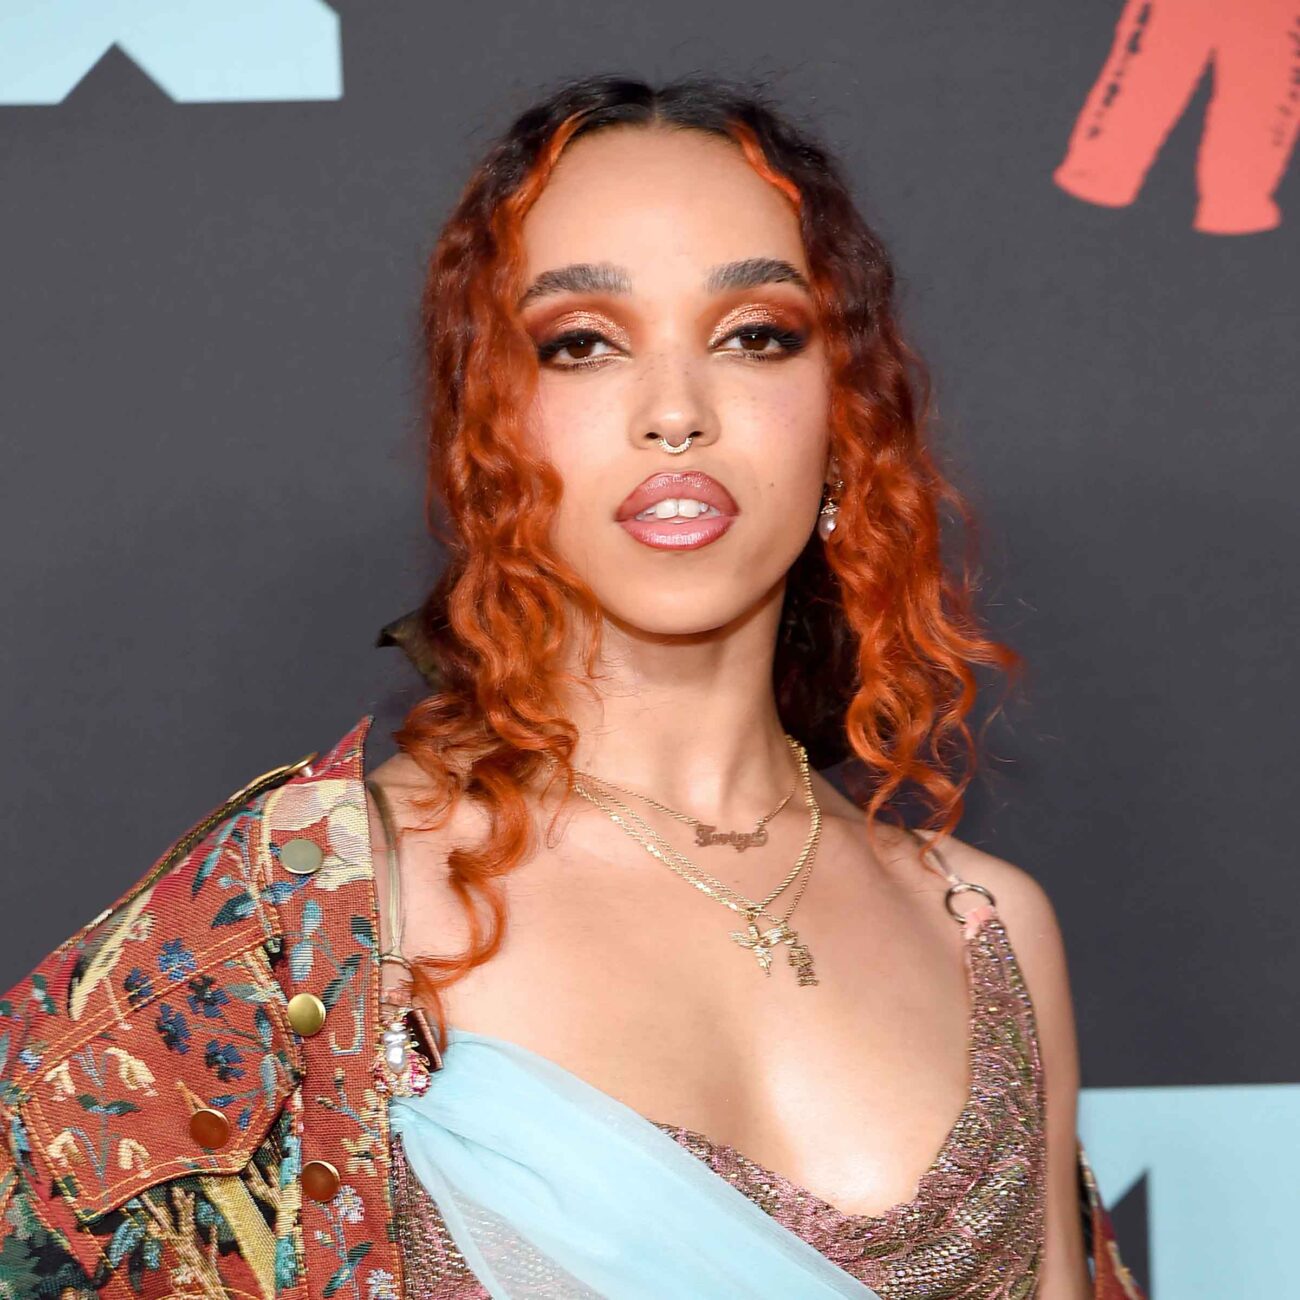 FKA Twigs lays it all on the line about her terrifying, abusive relationship with Shia LeBeouf. Can the story get more twisted?